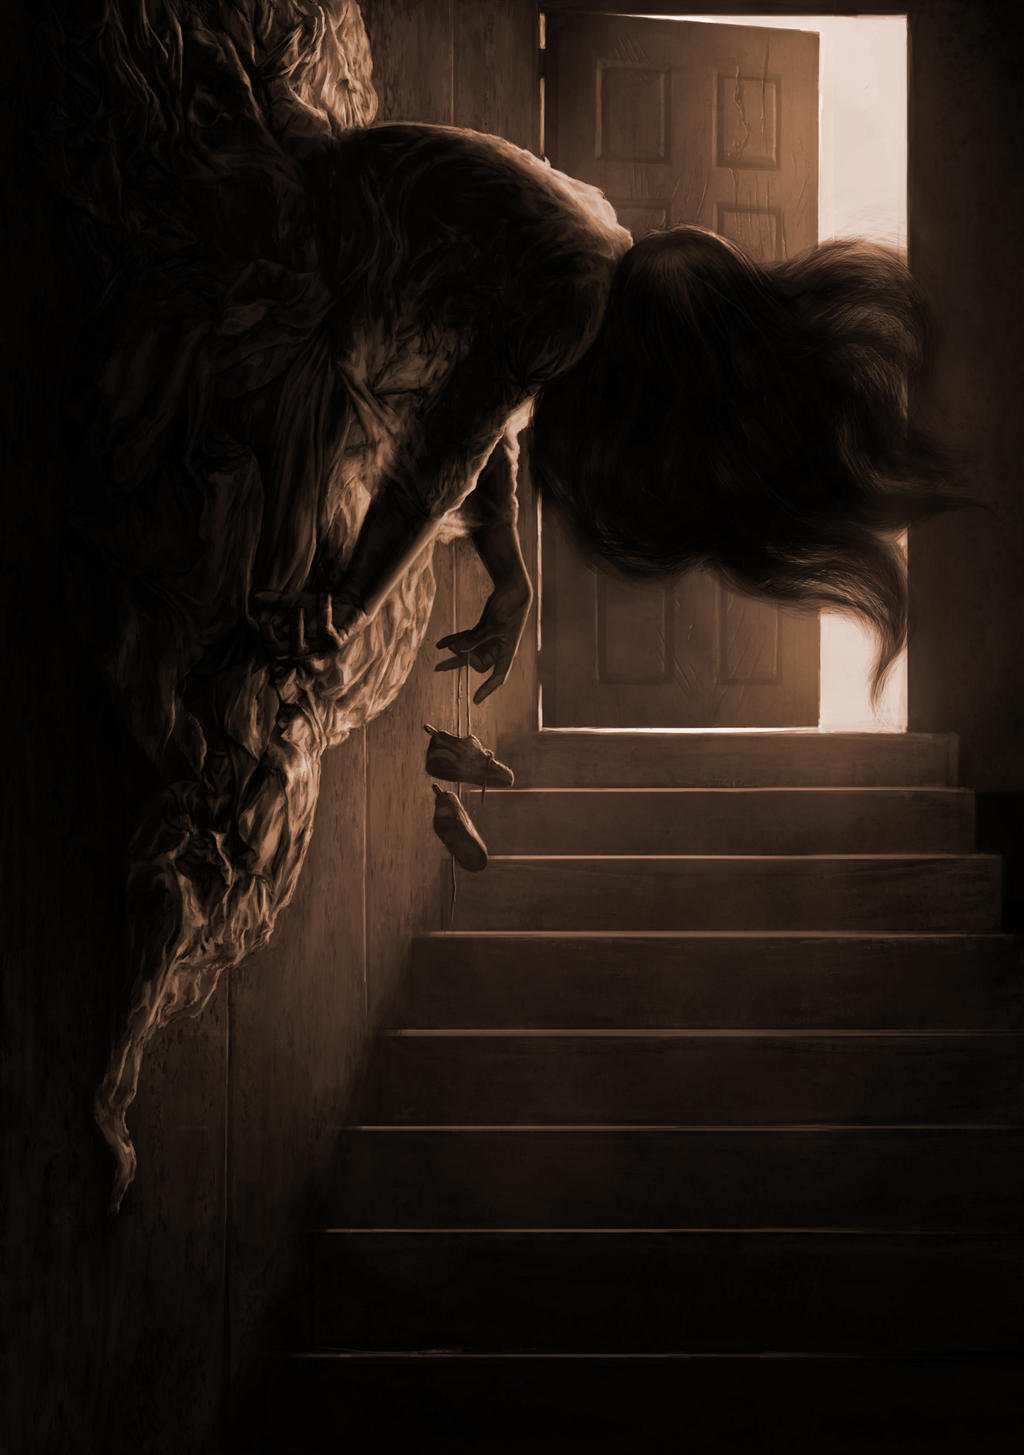 The Lady In The Basement By Lpeters On DeviantArt